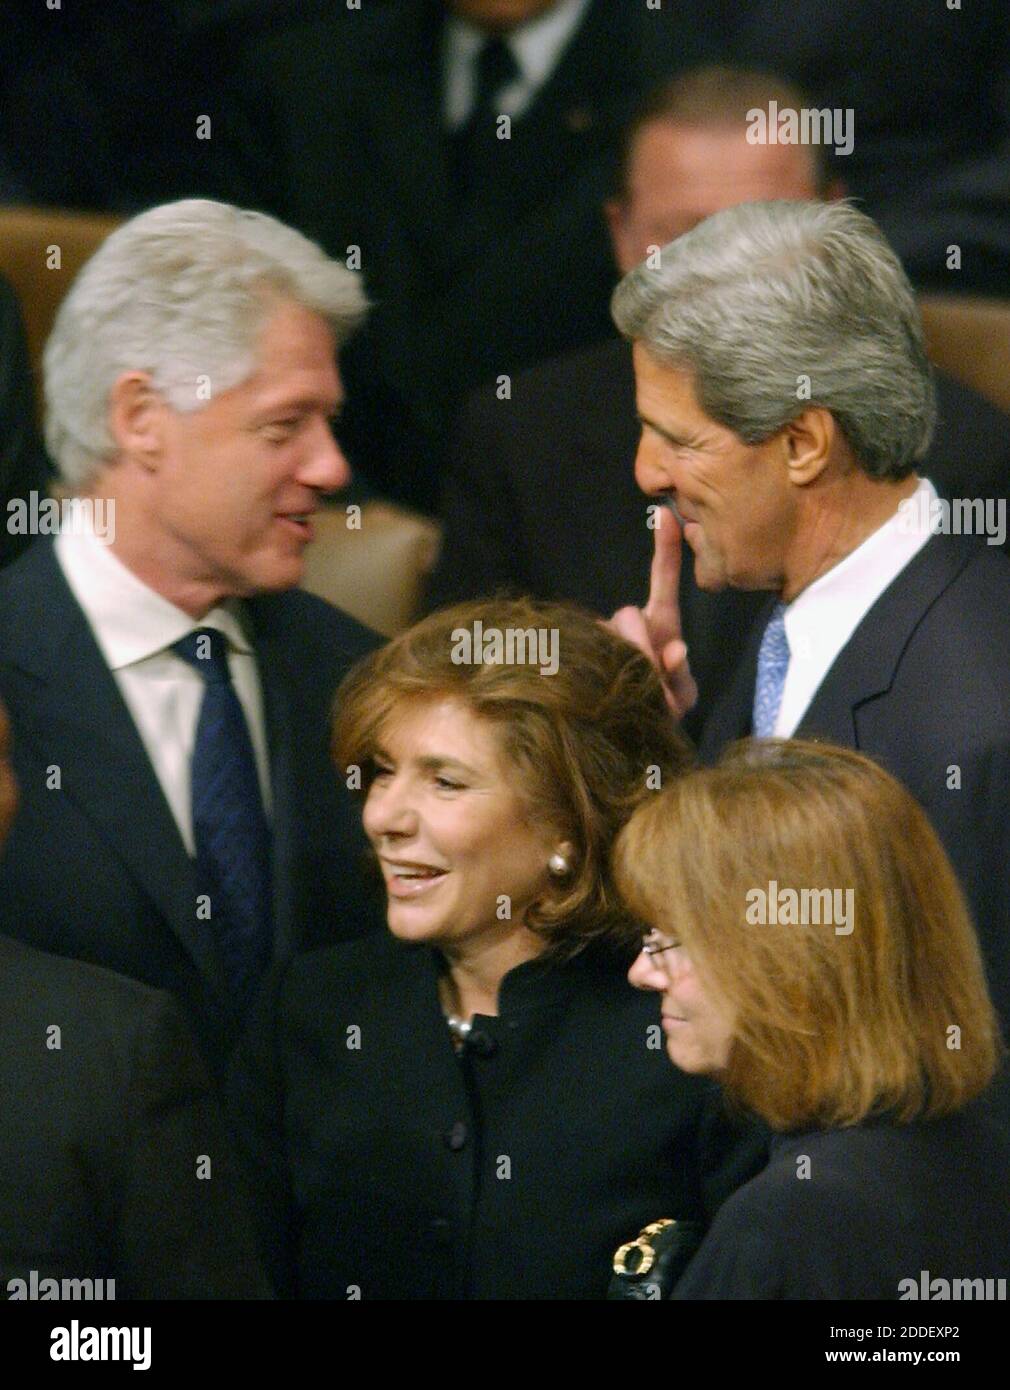 The presumptive Democratic nominee for president, United States Senator John Kerry (Democrat of Massachusetts), left, seemingly shares a secret with former US President Bill Clinton, left at Ronald Reagan's funeral at the Washington National Cathedral in Washington, D.C. on June 11, 2004.  Kerry's wife, Theresa Heinz Kerry, is in the foreground at center.Credit: Ron Sachs / CNP  (RESTRICTION: NO New York or New Jersey Newspapers or newspapers within a 75 mile radius of New York City) /MediaPunch Stock Photo